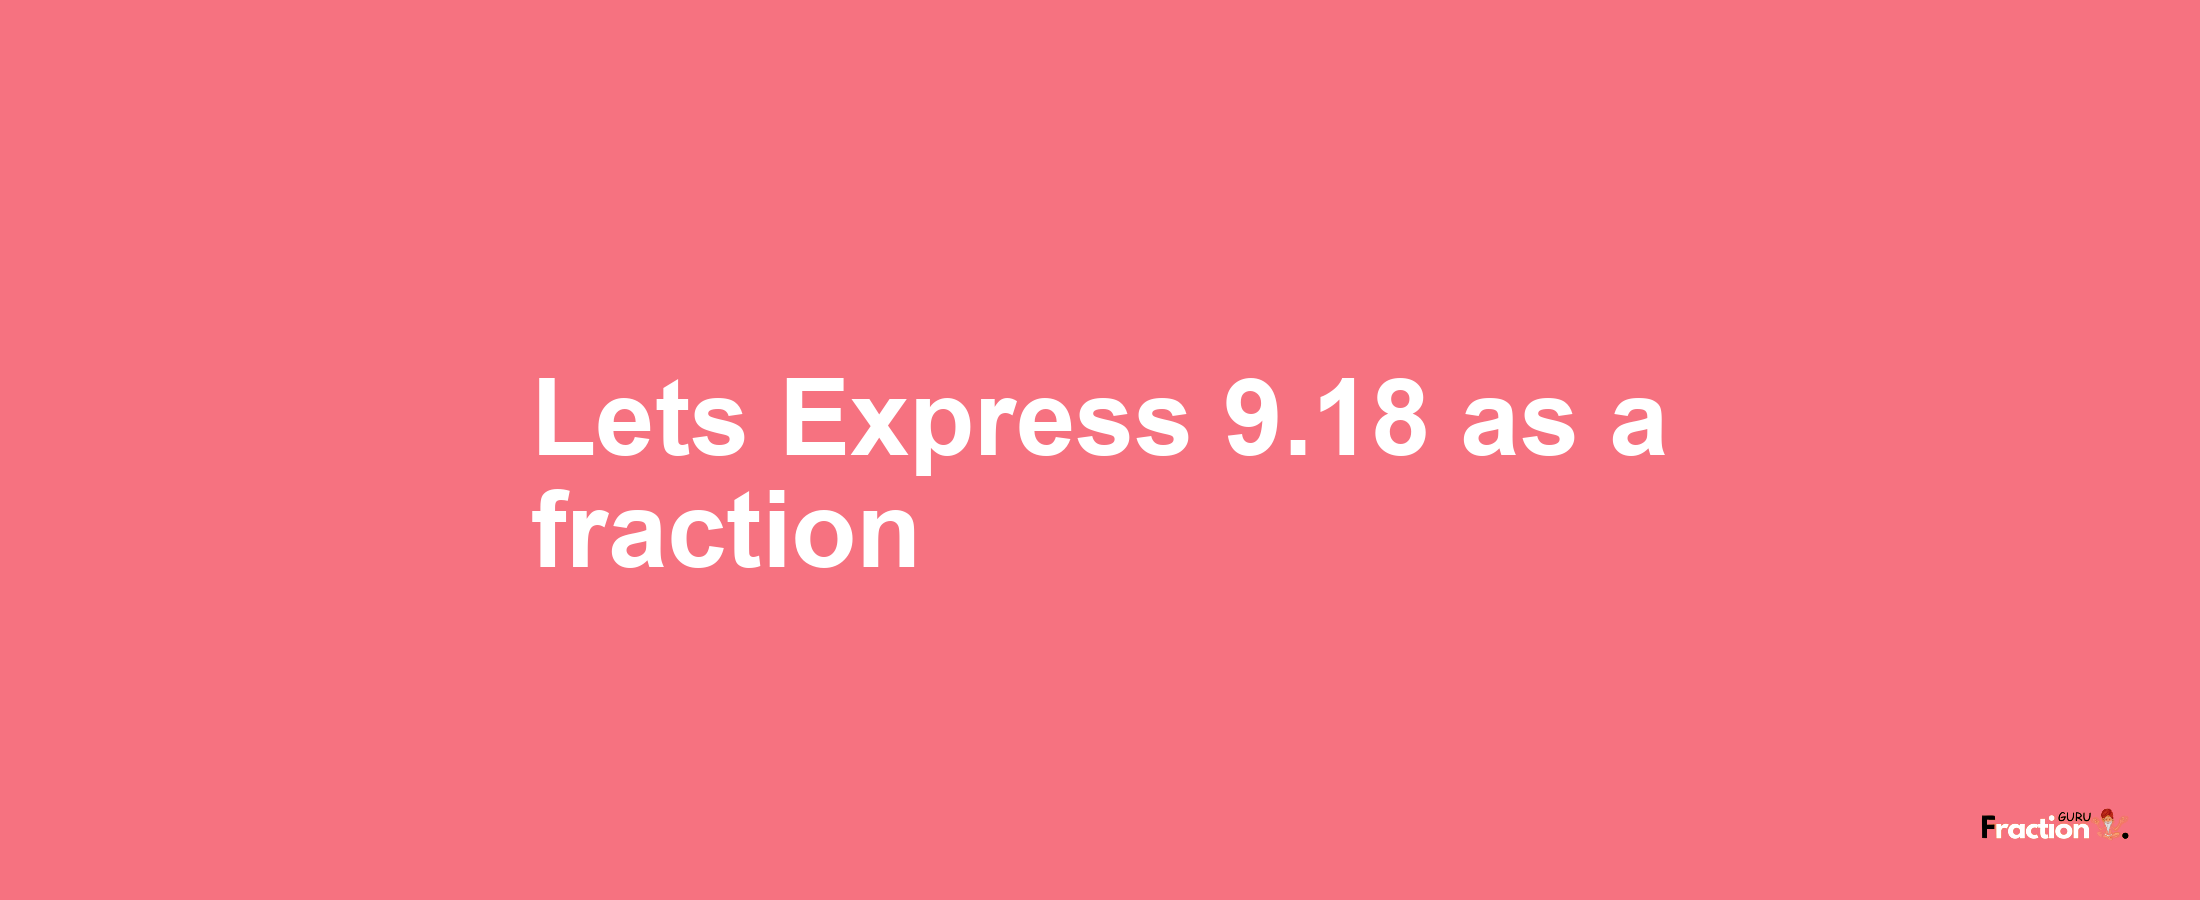 Lets Express 9.18 as afraction